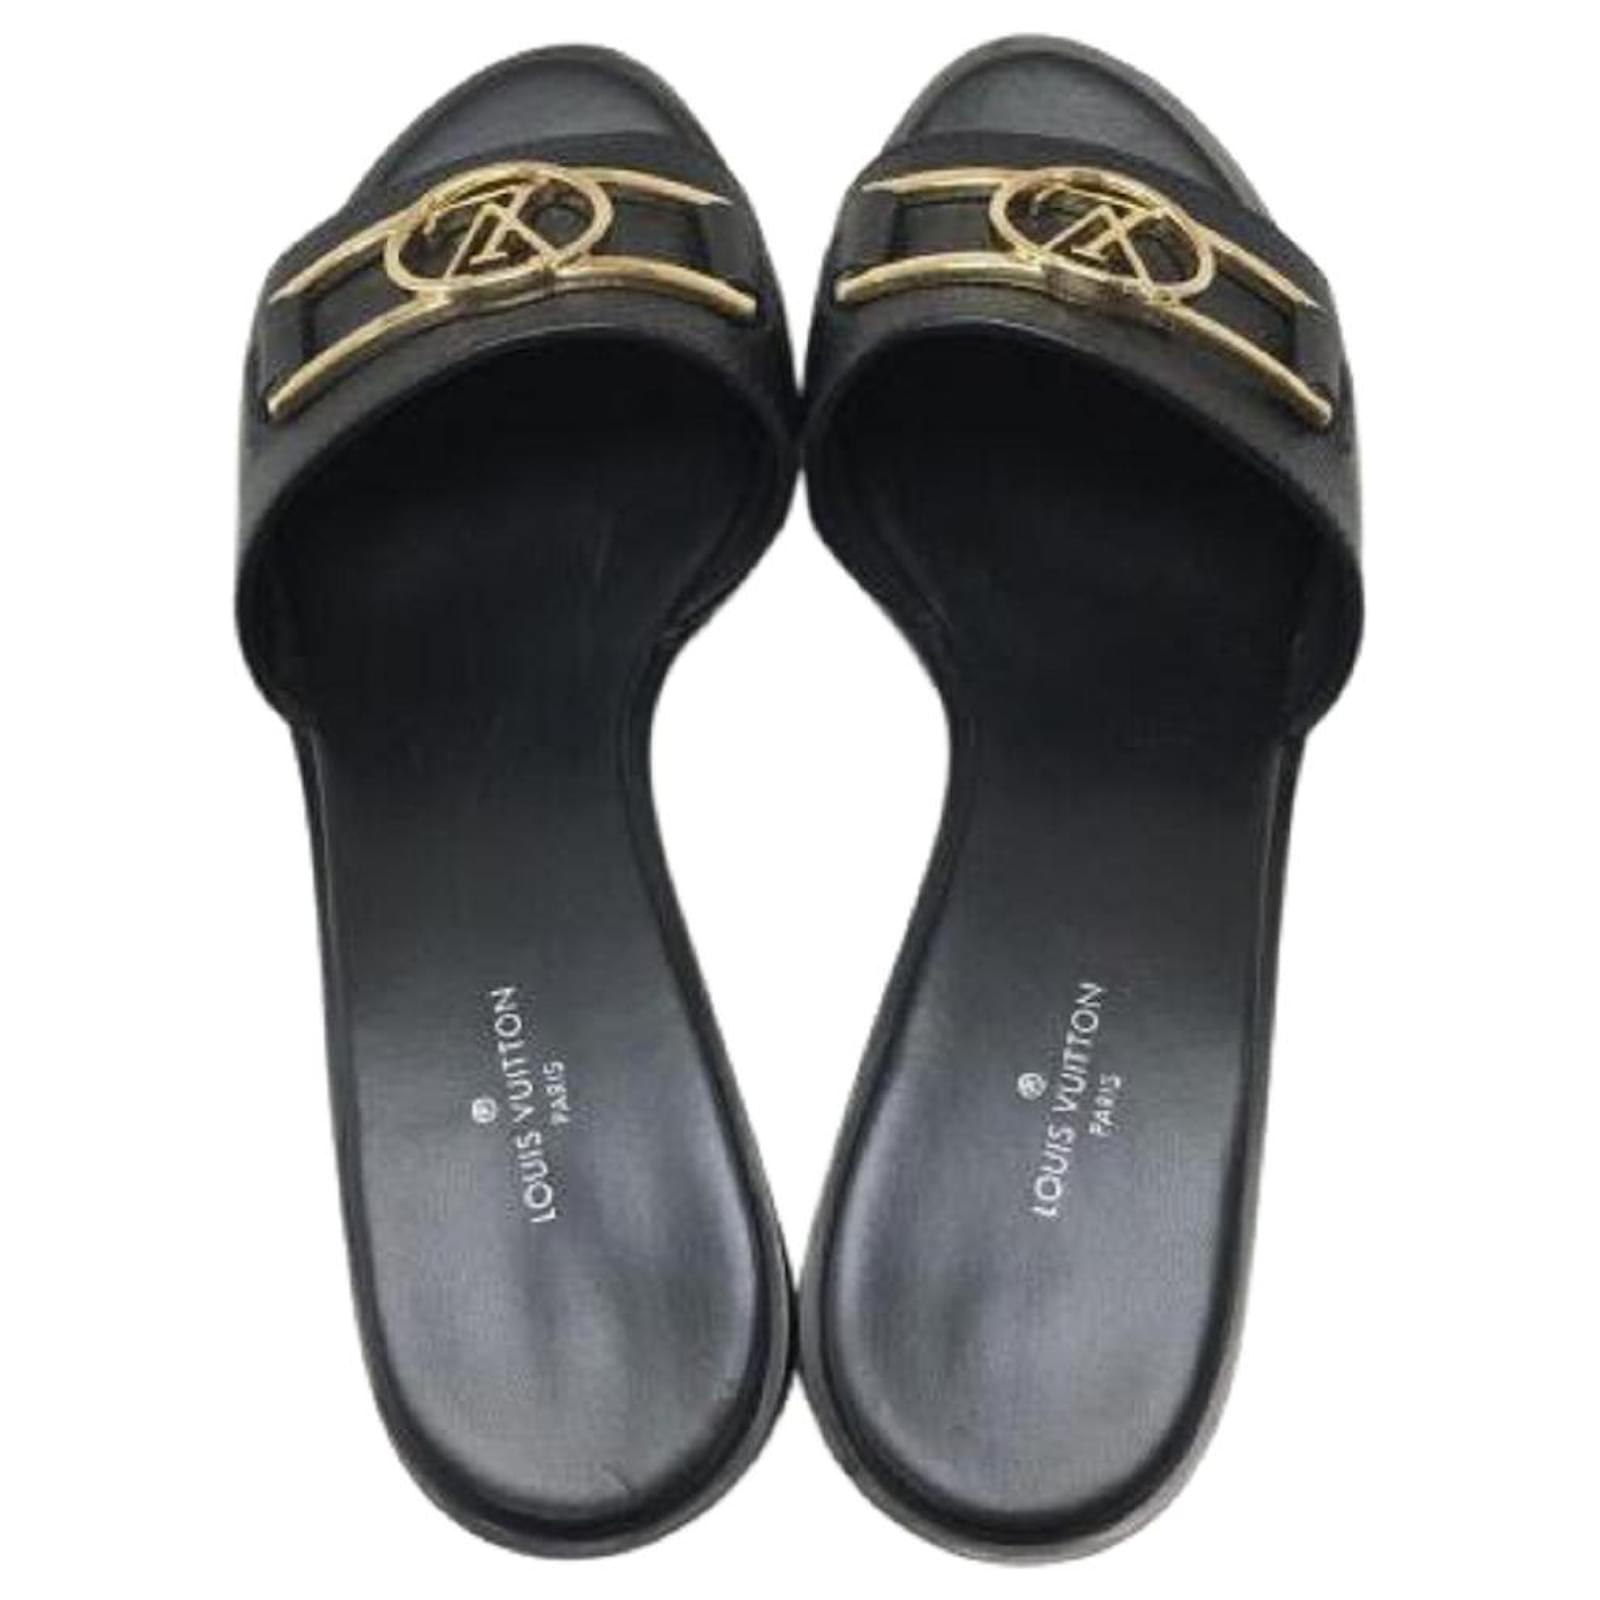 Leather sandals Louis Vuitton Black size 41 EU in Leather - 23178131